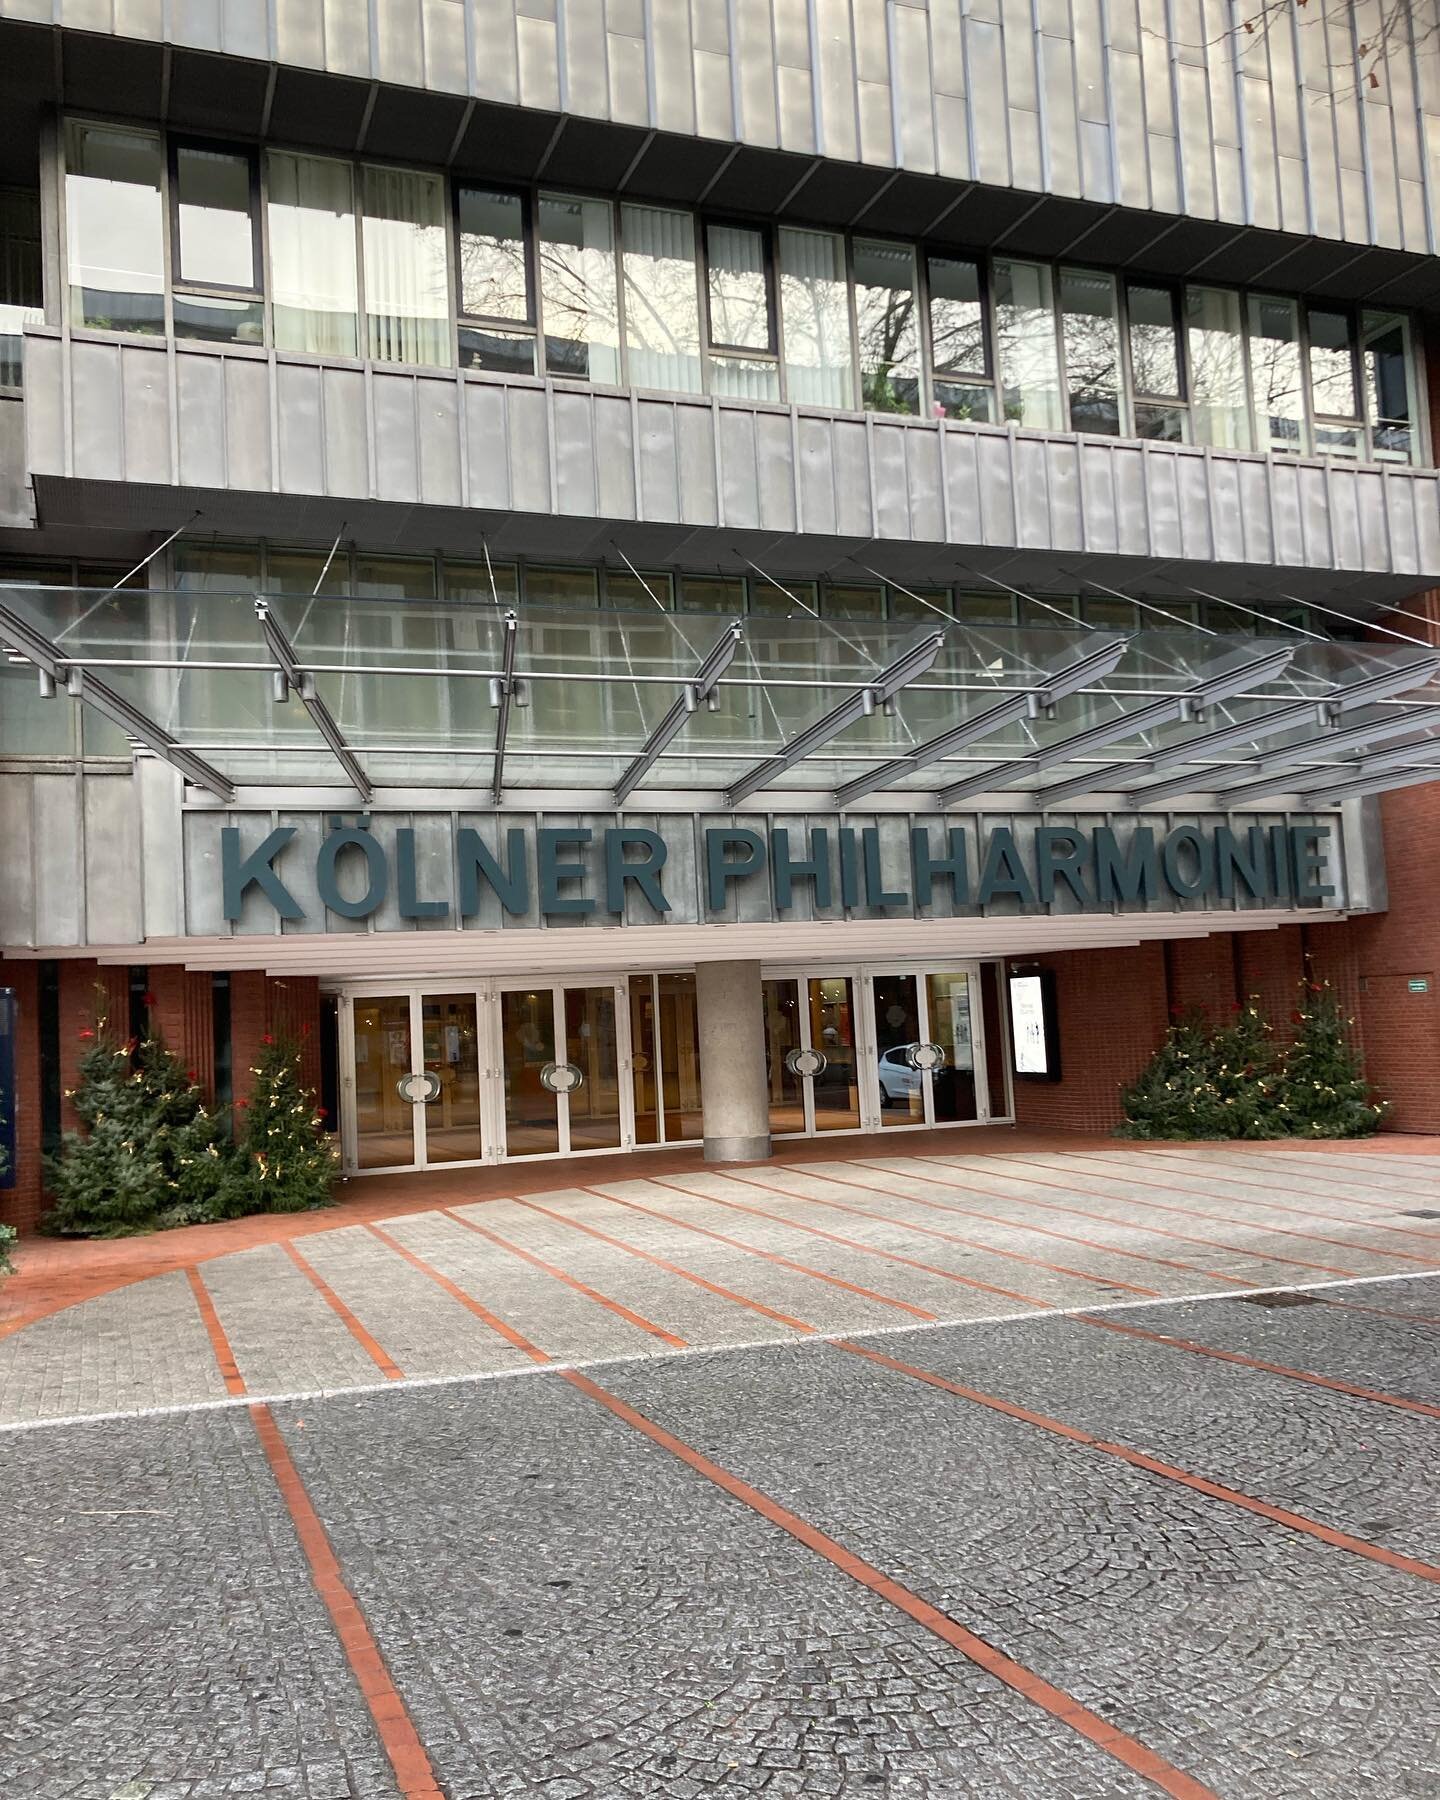 Looking forward to performing @koelnerphilharmonie tonight! Very excited to be in K&ouml;ln for the first time.🇩🇪👋🏻